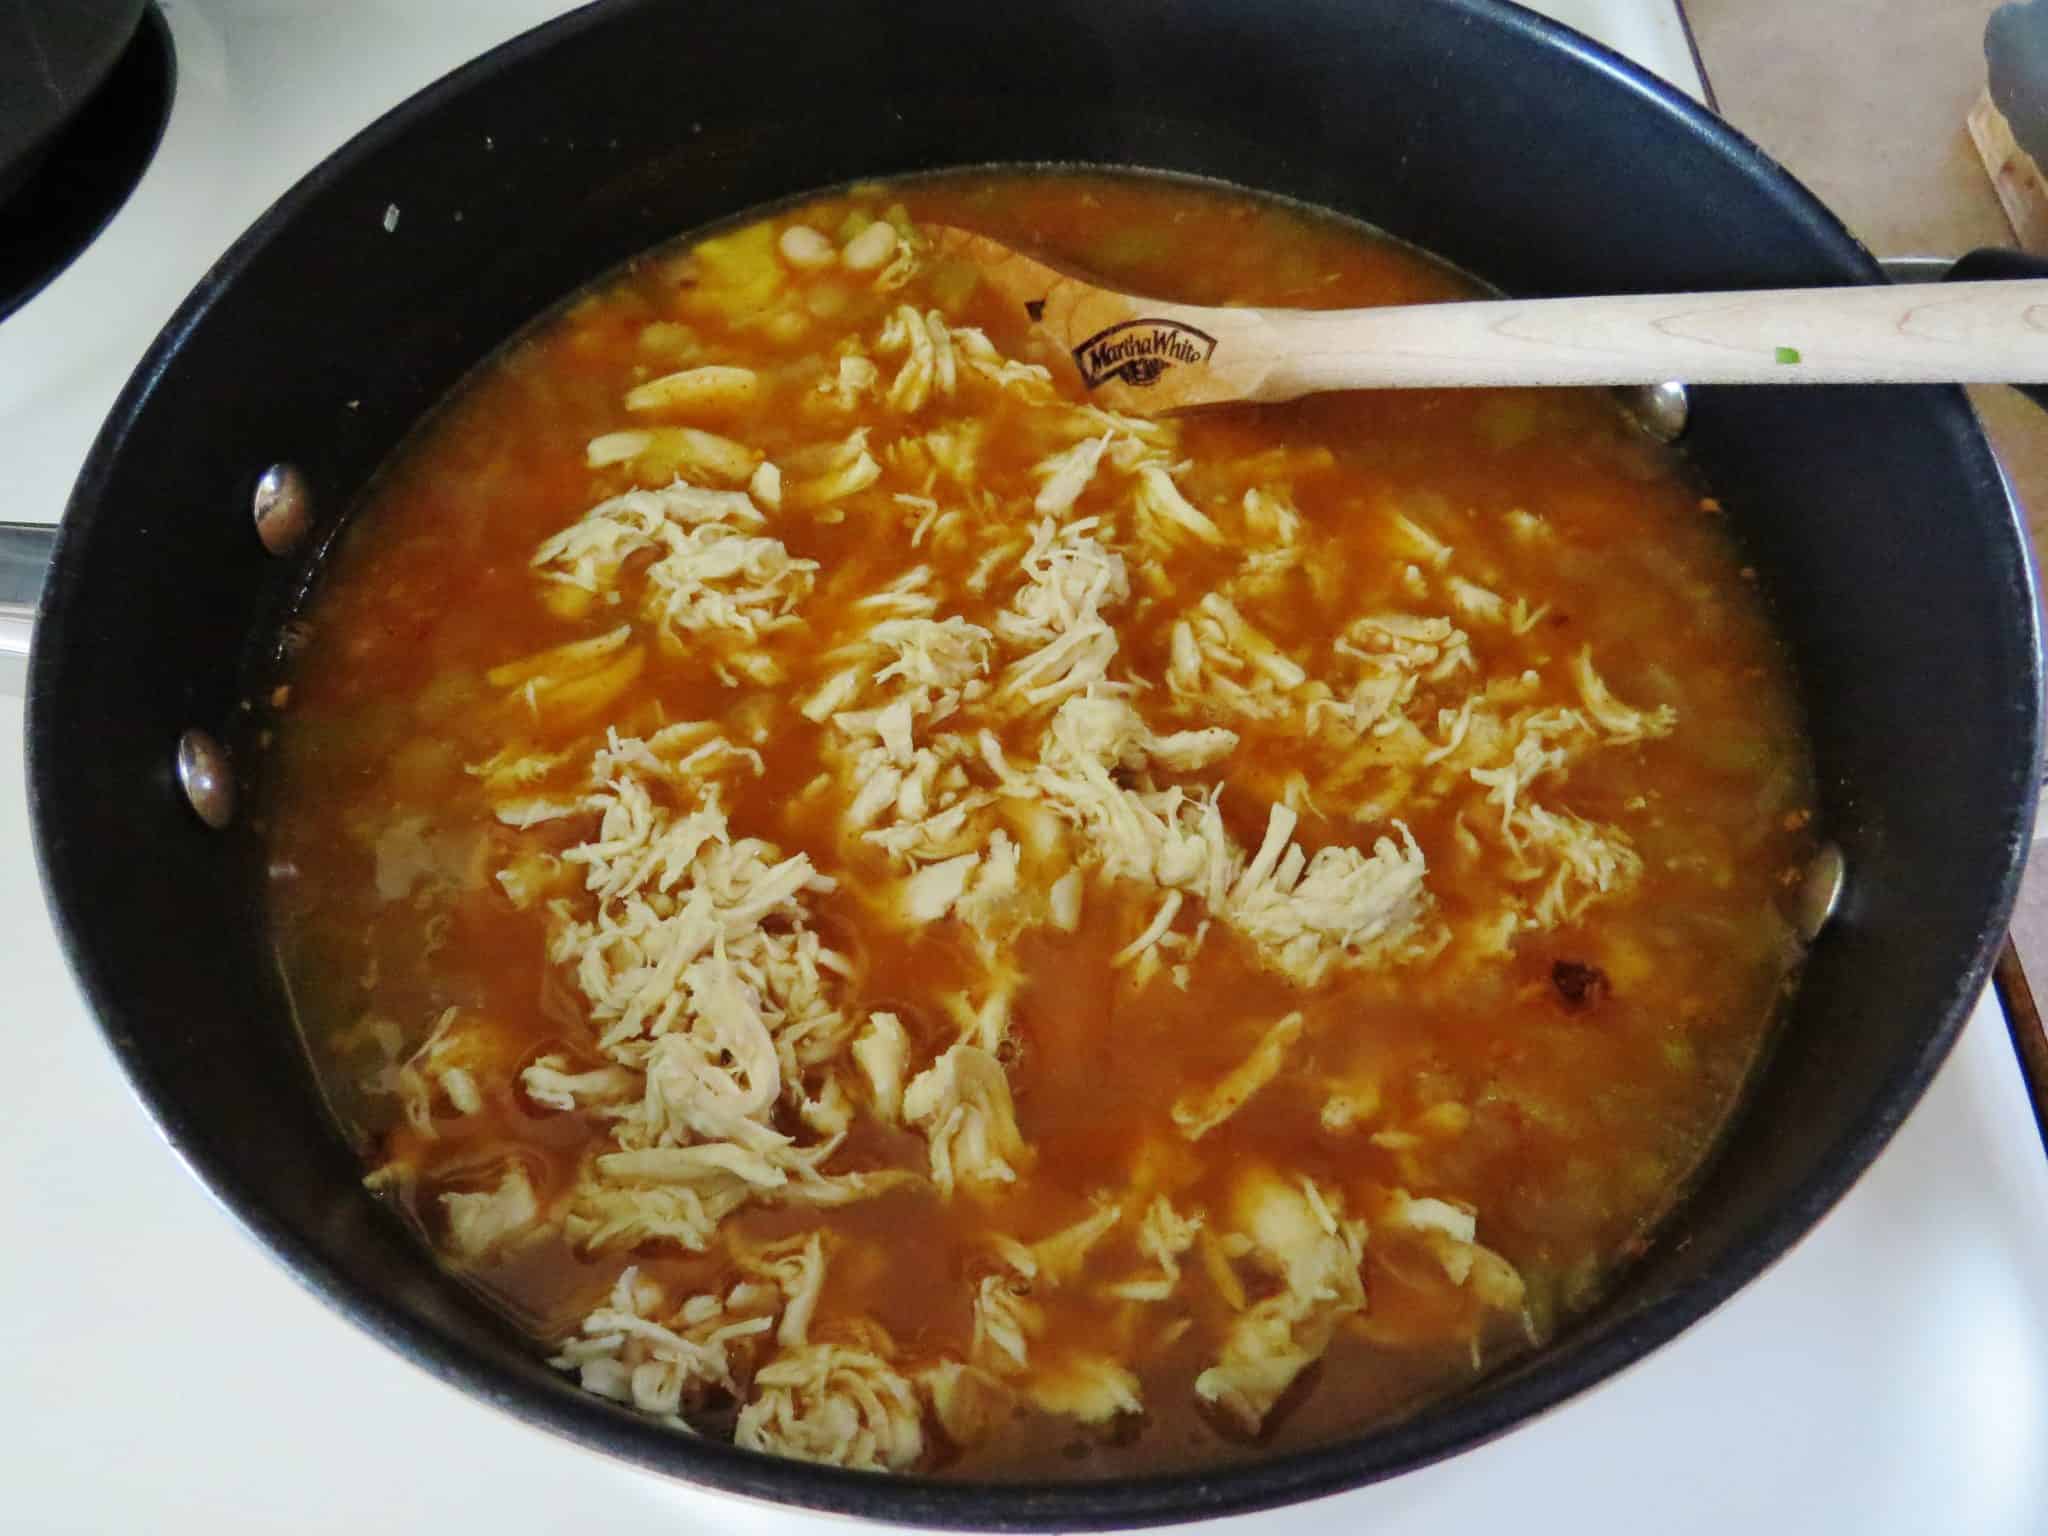 shredded chicken and chicken broth shown in a pot with a wooden spoon.